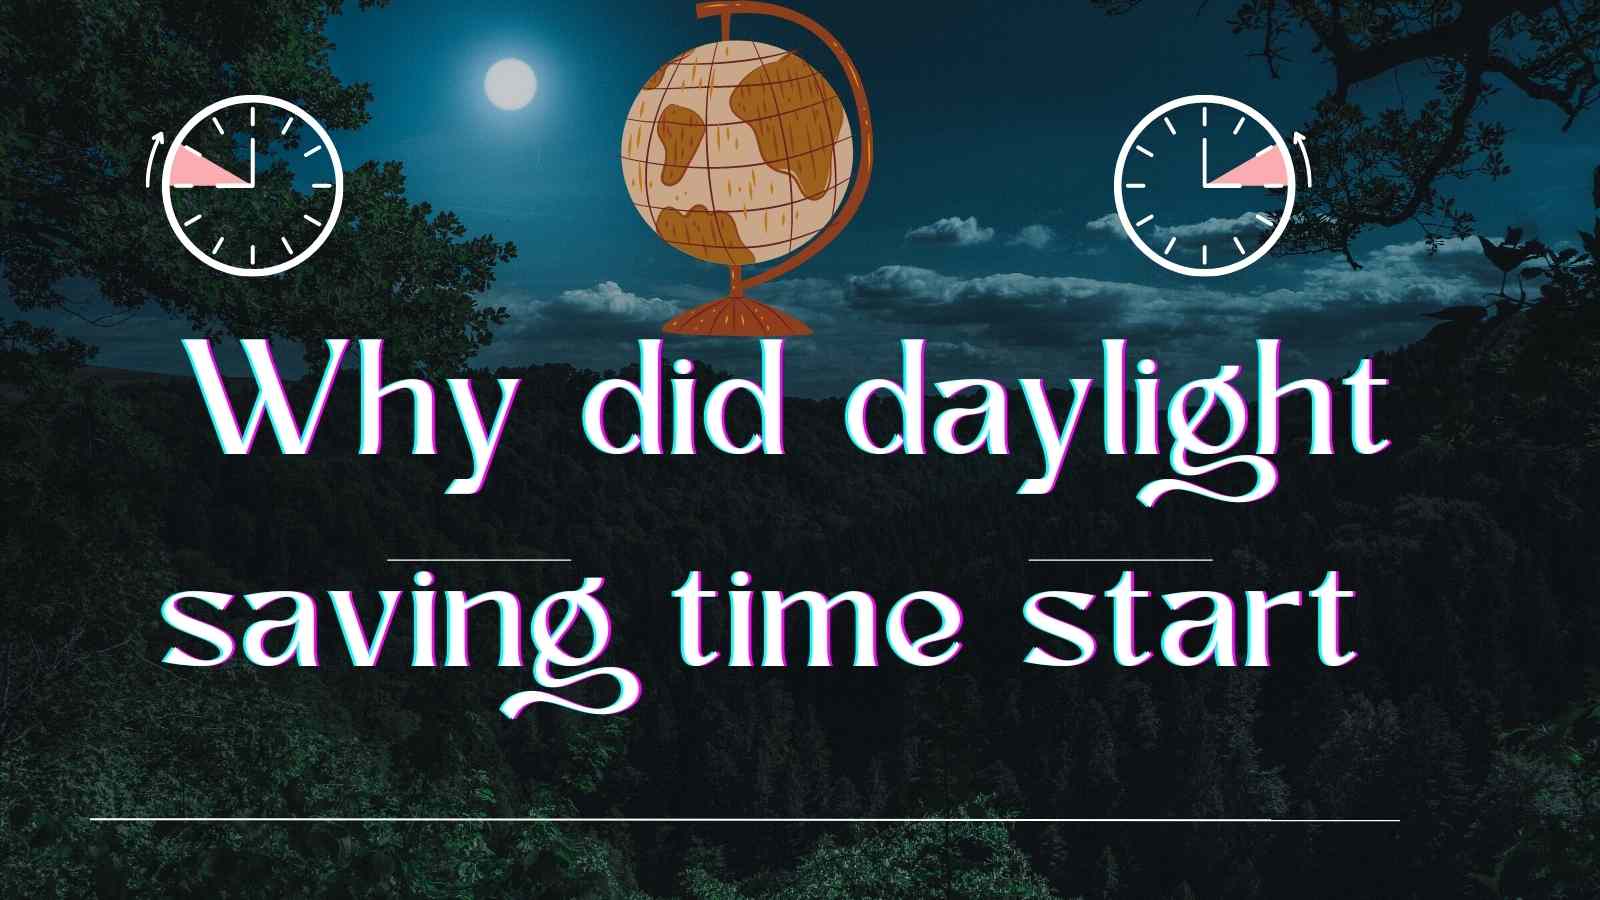 Why did daylight saving time start, Moon Image with Text